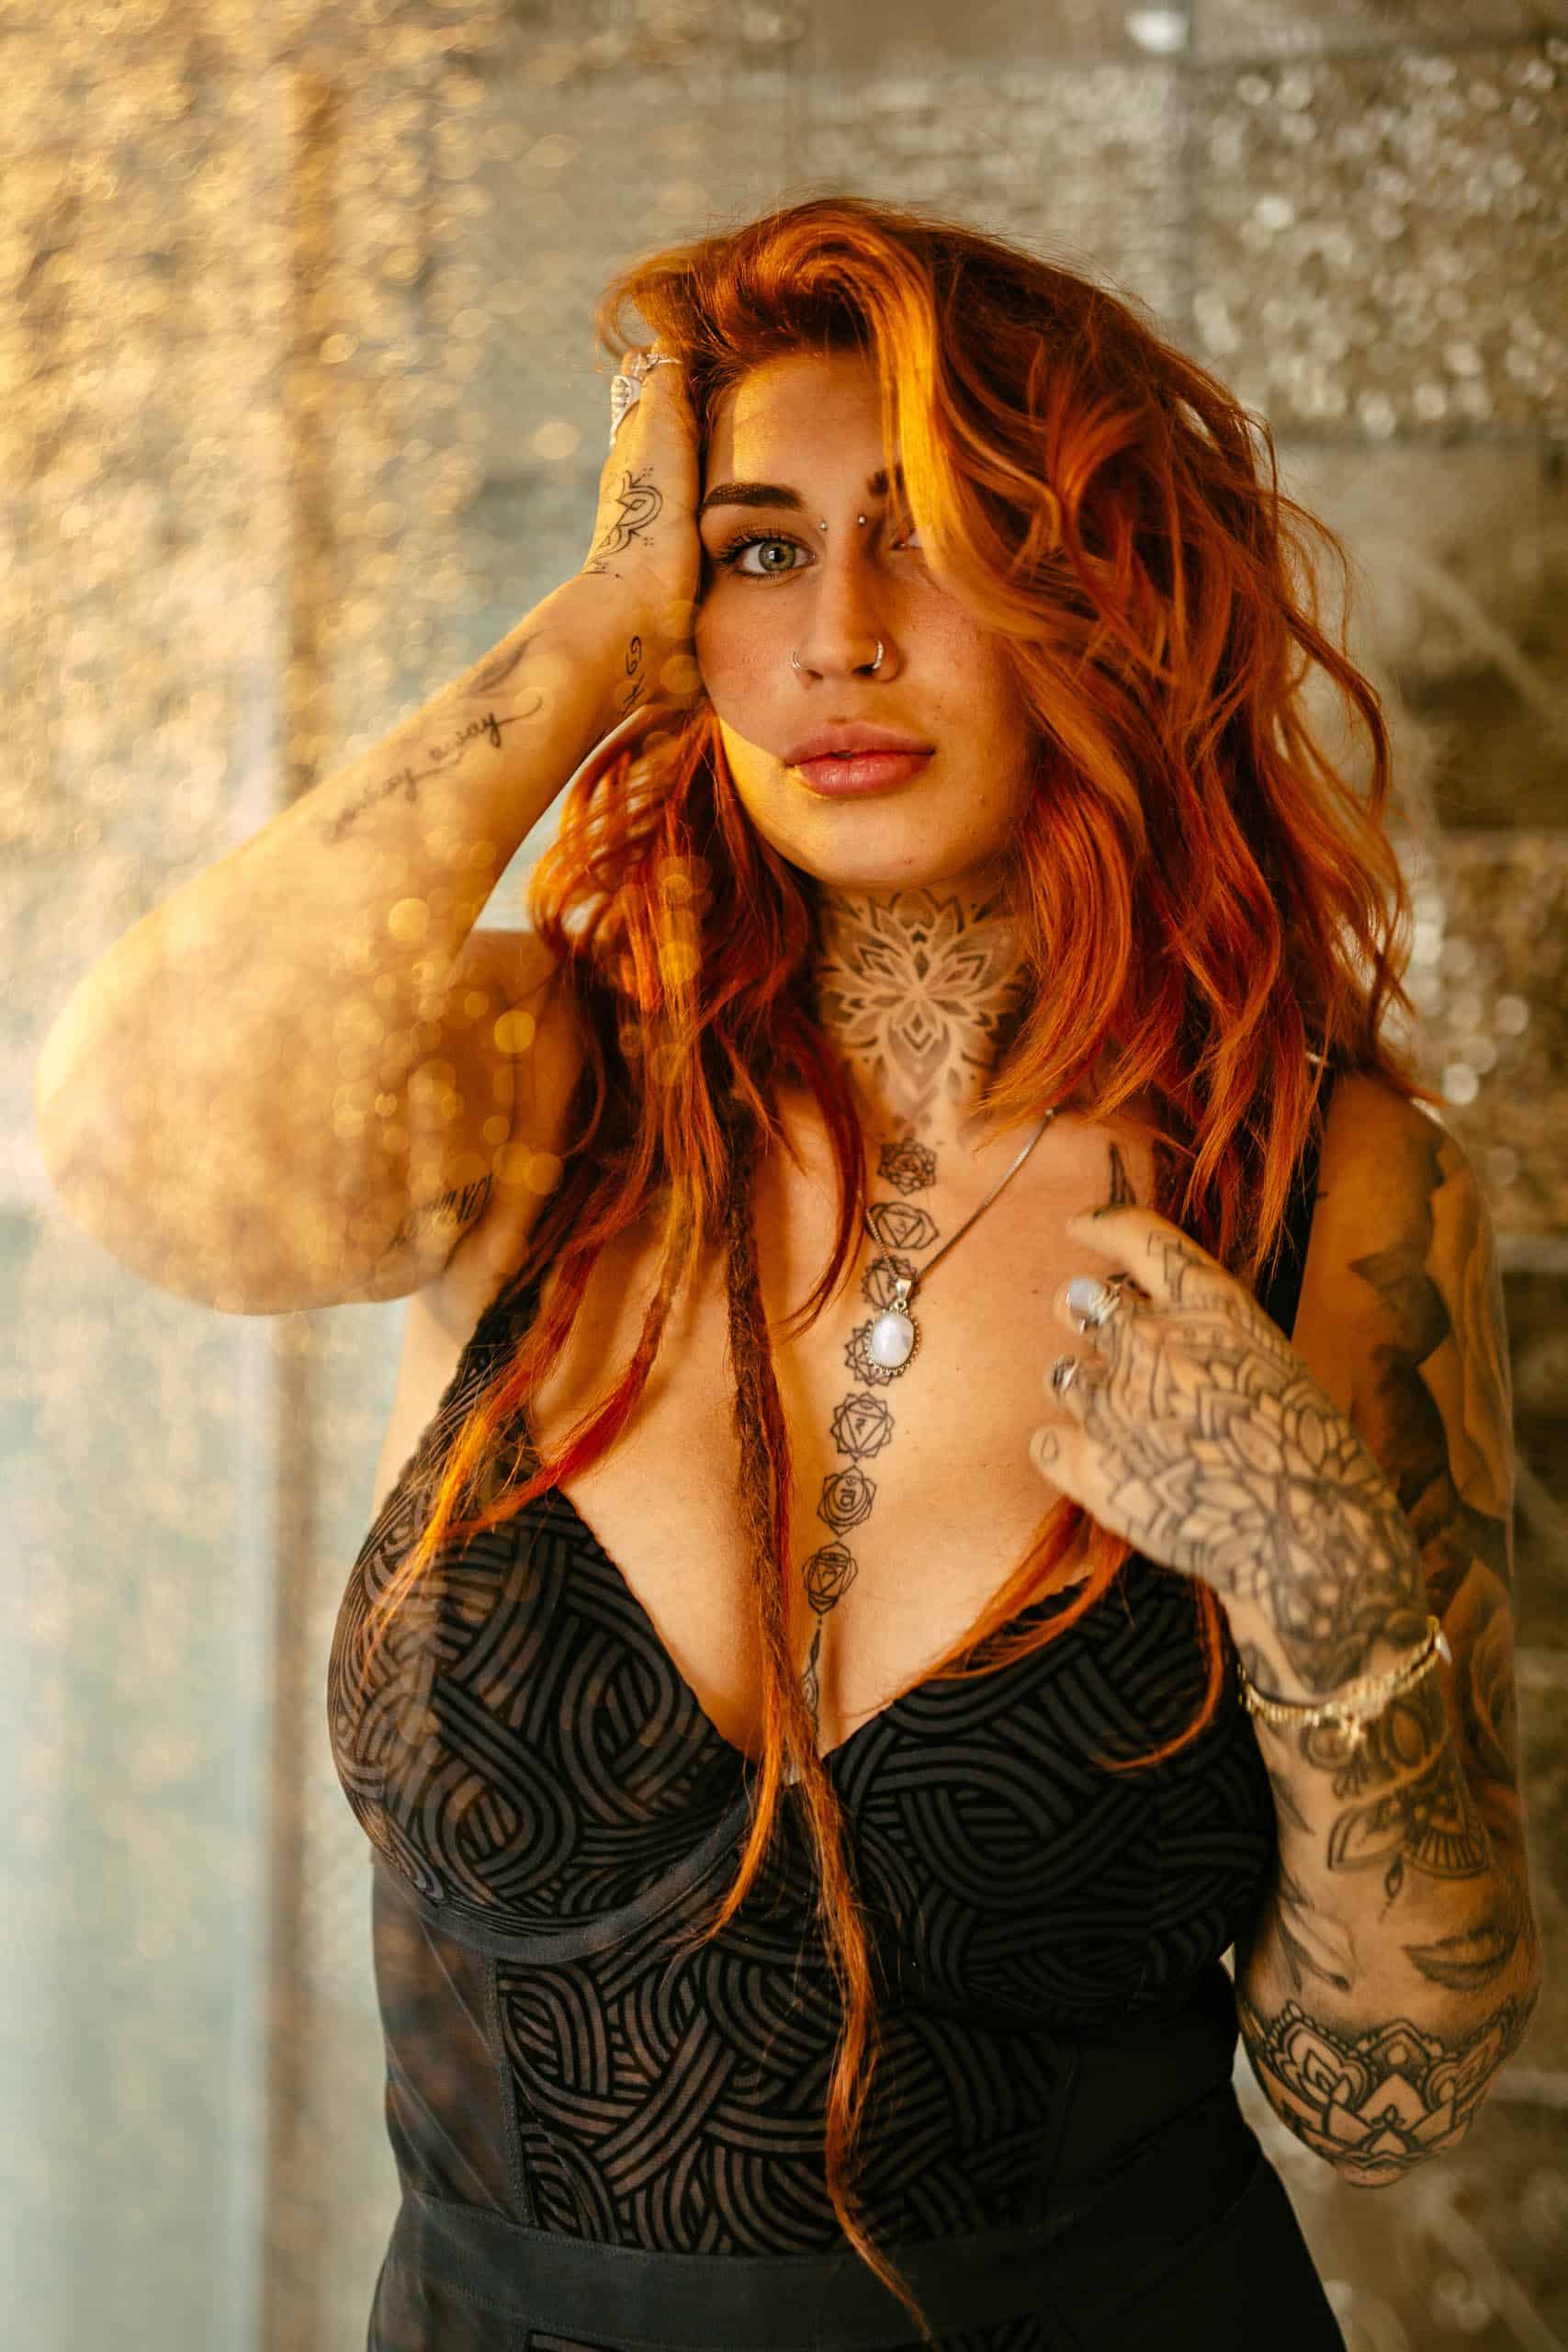 A woman with tattoos on her body enjoys a boudoir shoot in Hoek van Holland.